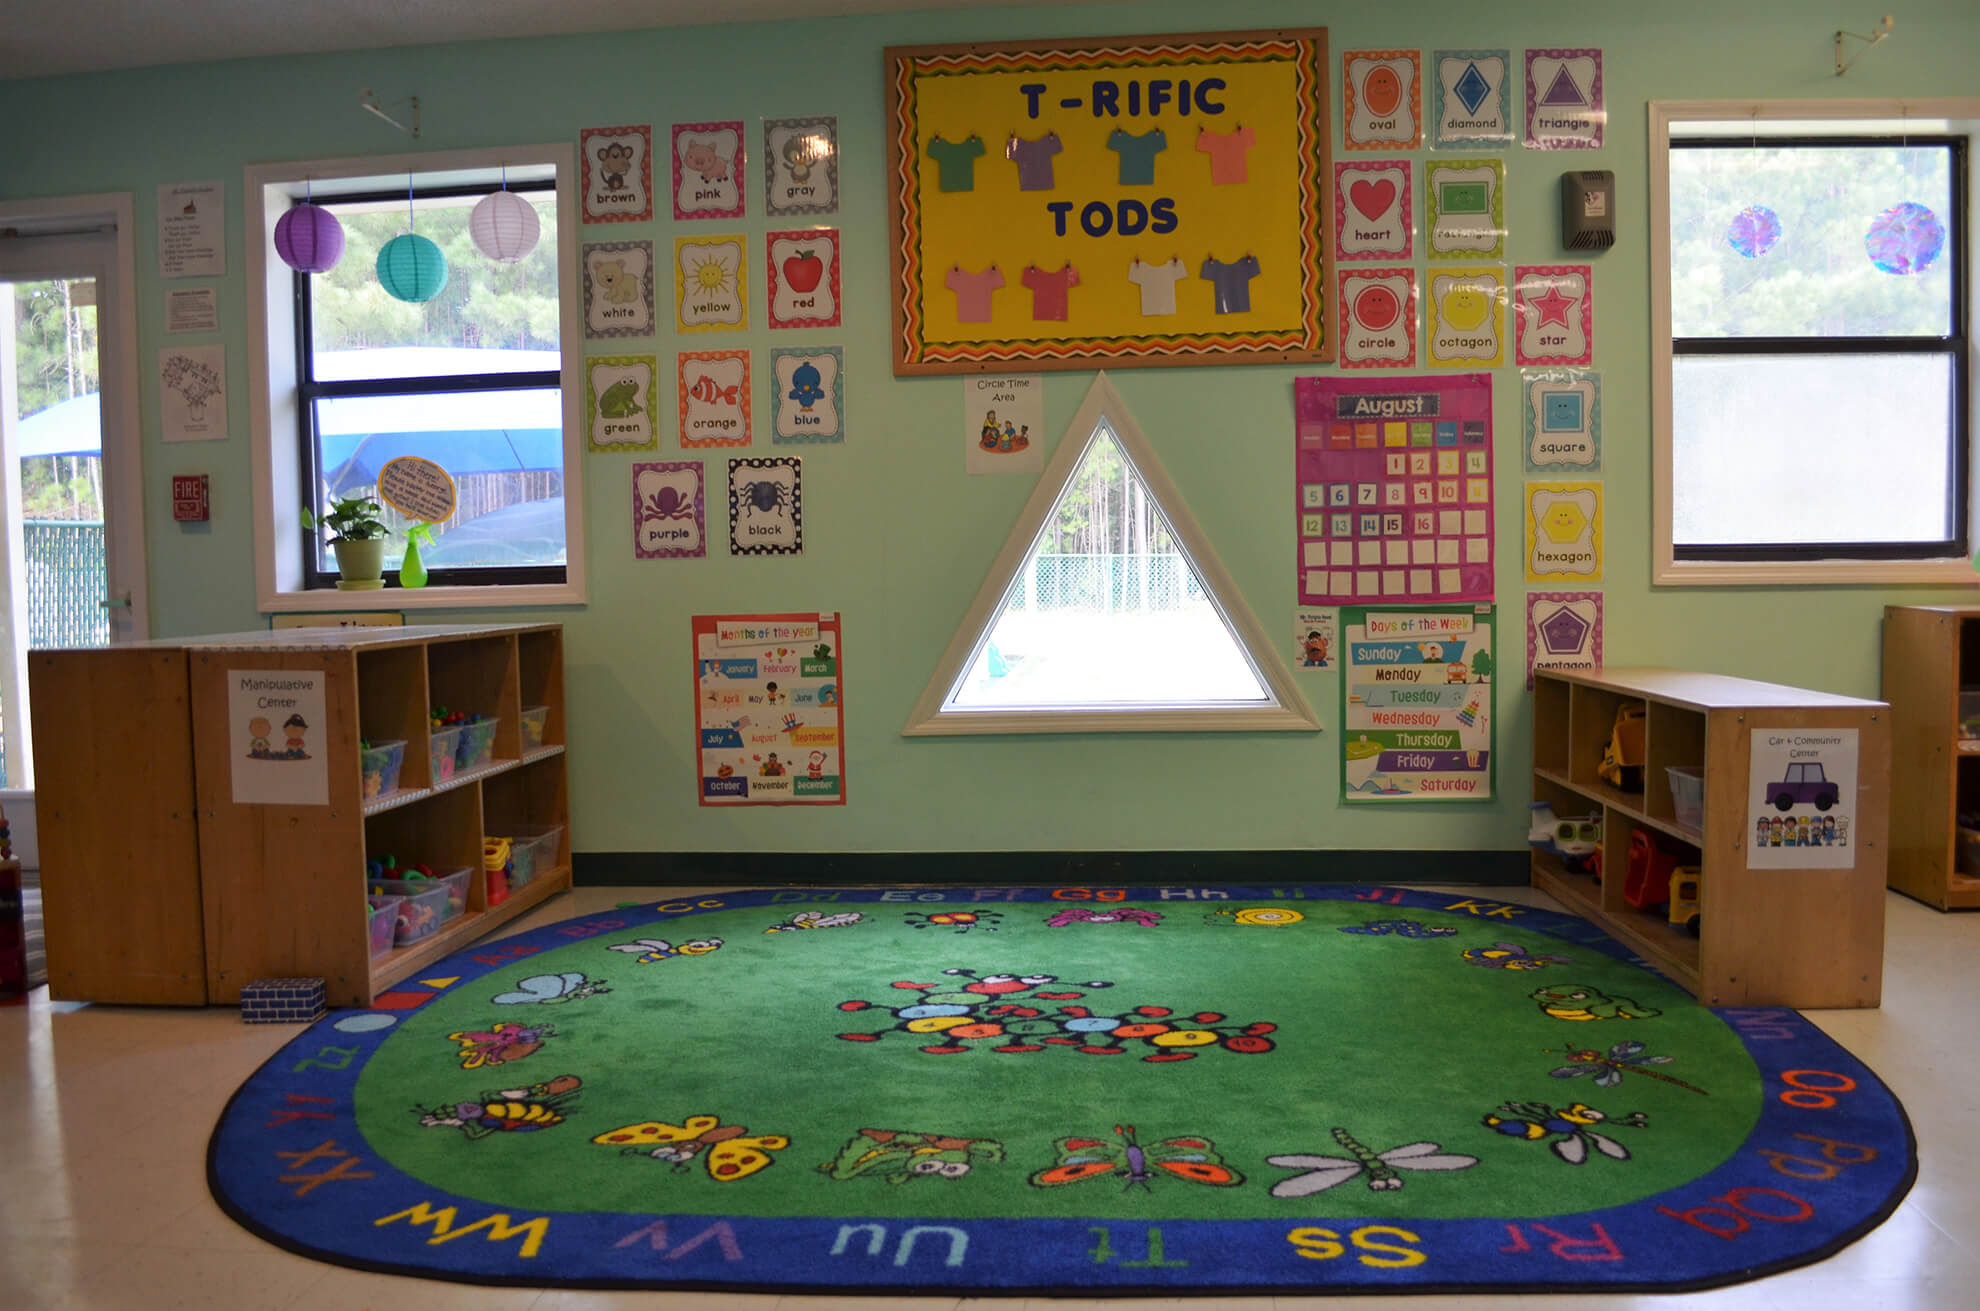 Our Transition Toddler Room